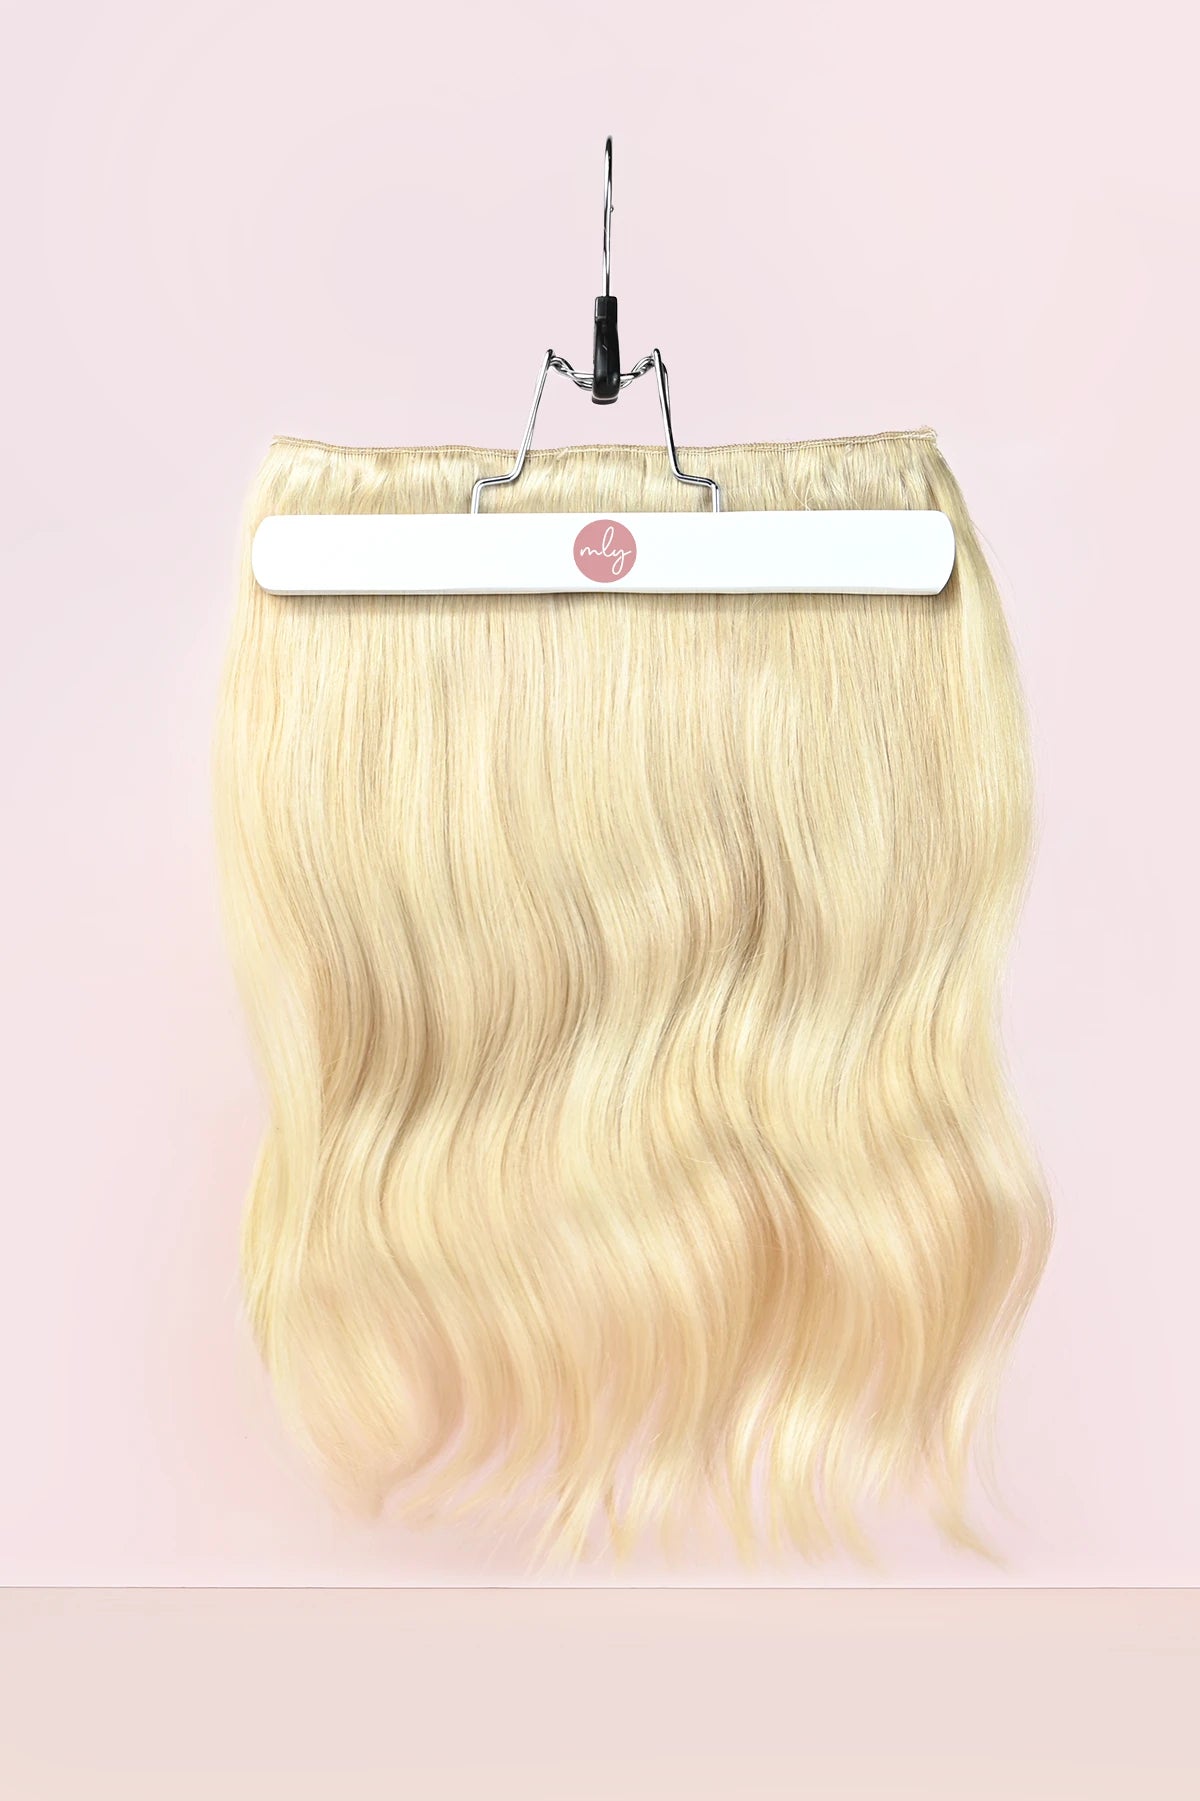 Civic vloeistof . Platina Blonde clip-in hairextensions 💍 – MLY Hairextensions